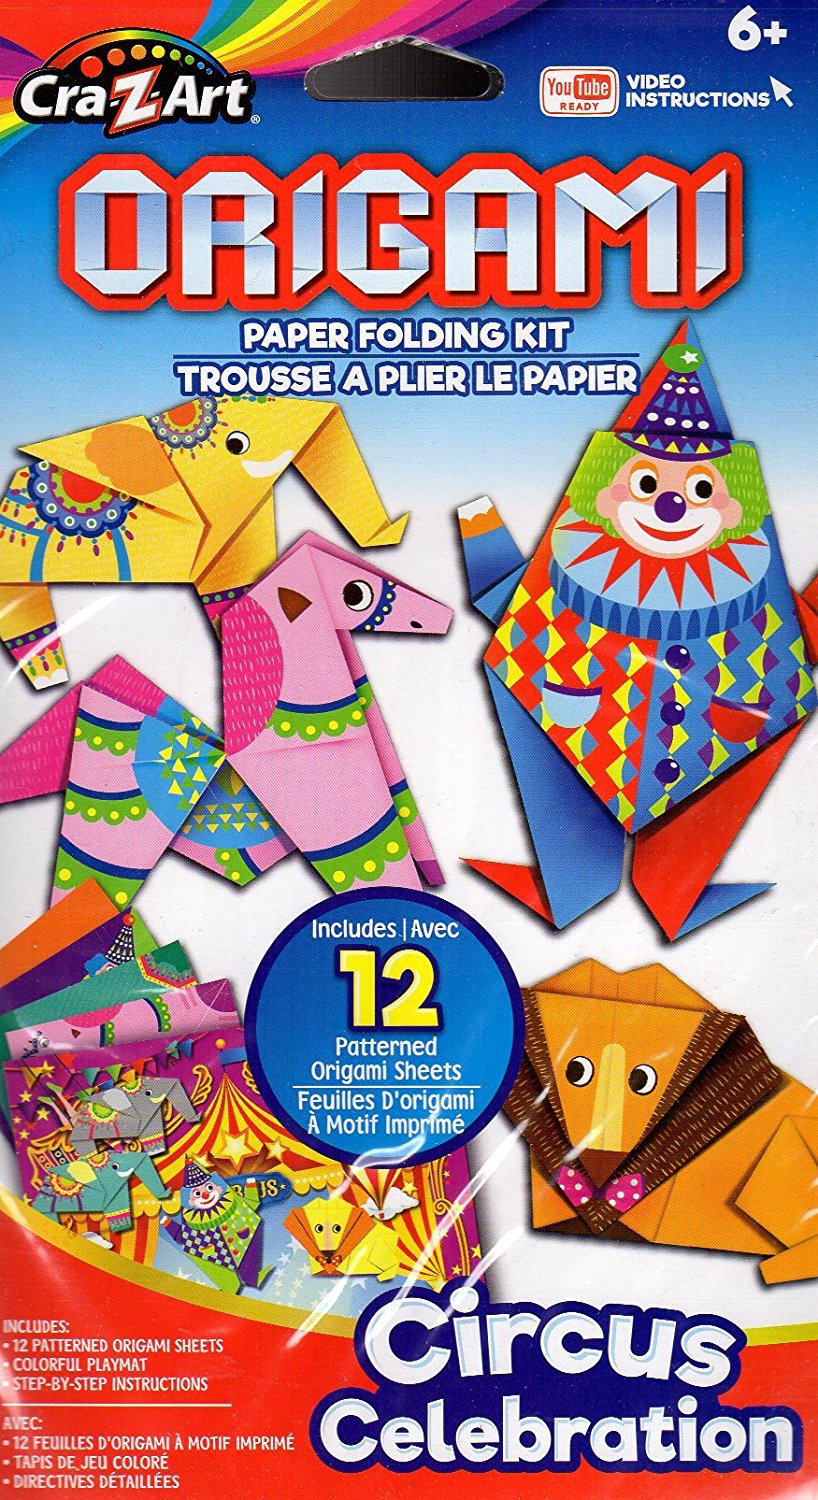 Beginners Origami Paper Folding Kit -  Ready Video Instructions -  Circus Celebration